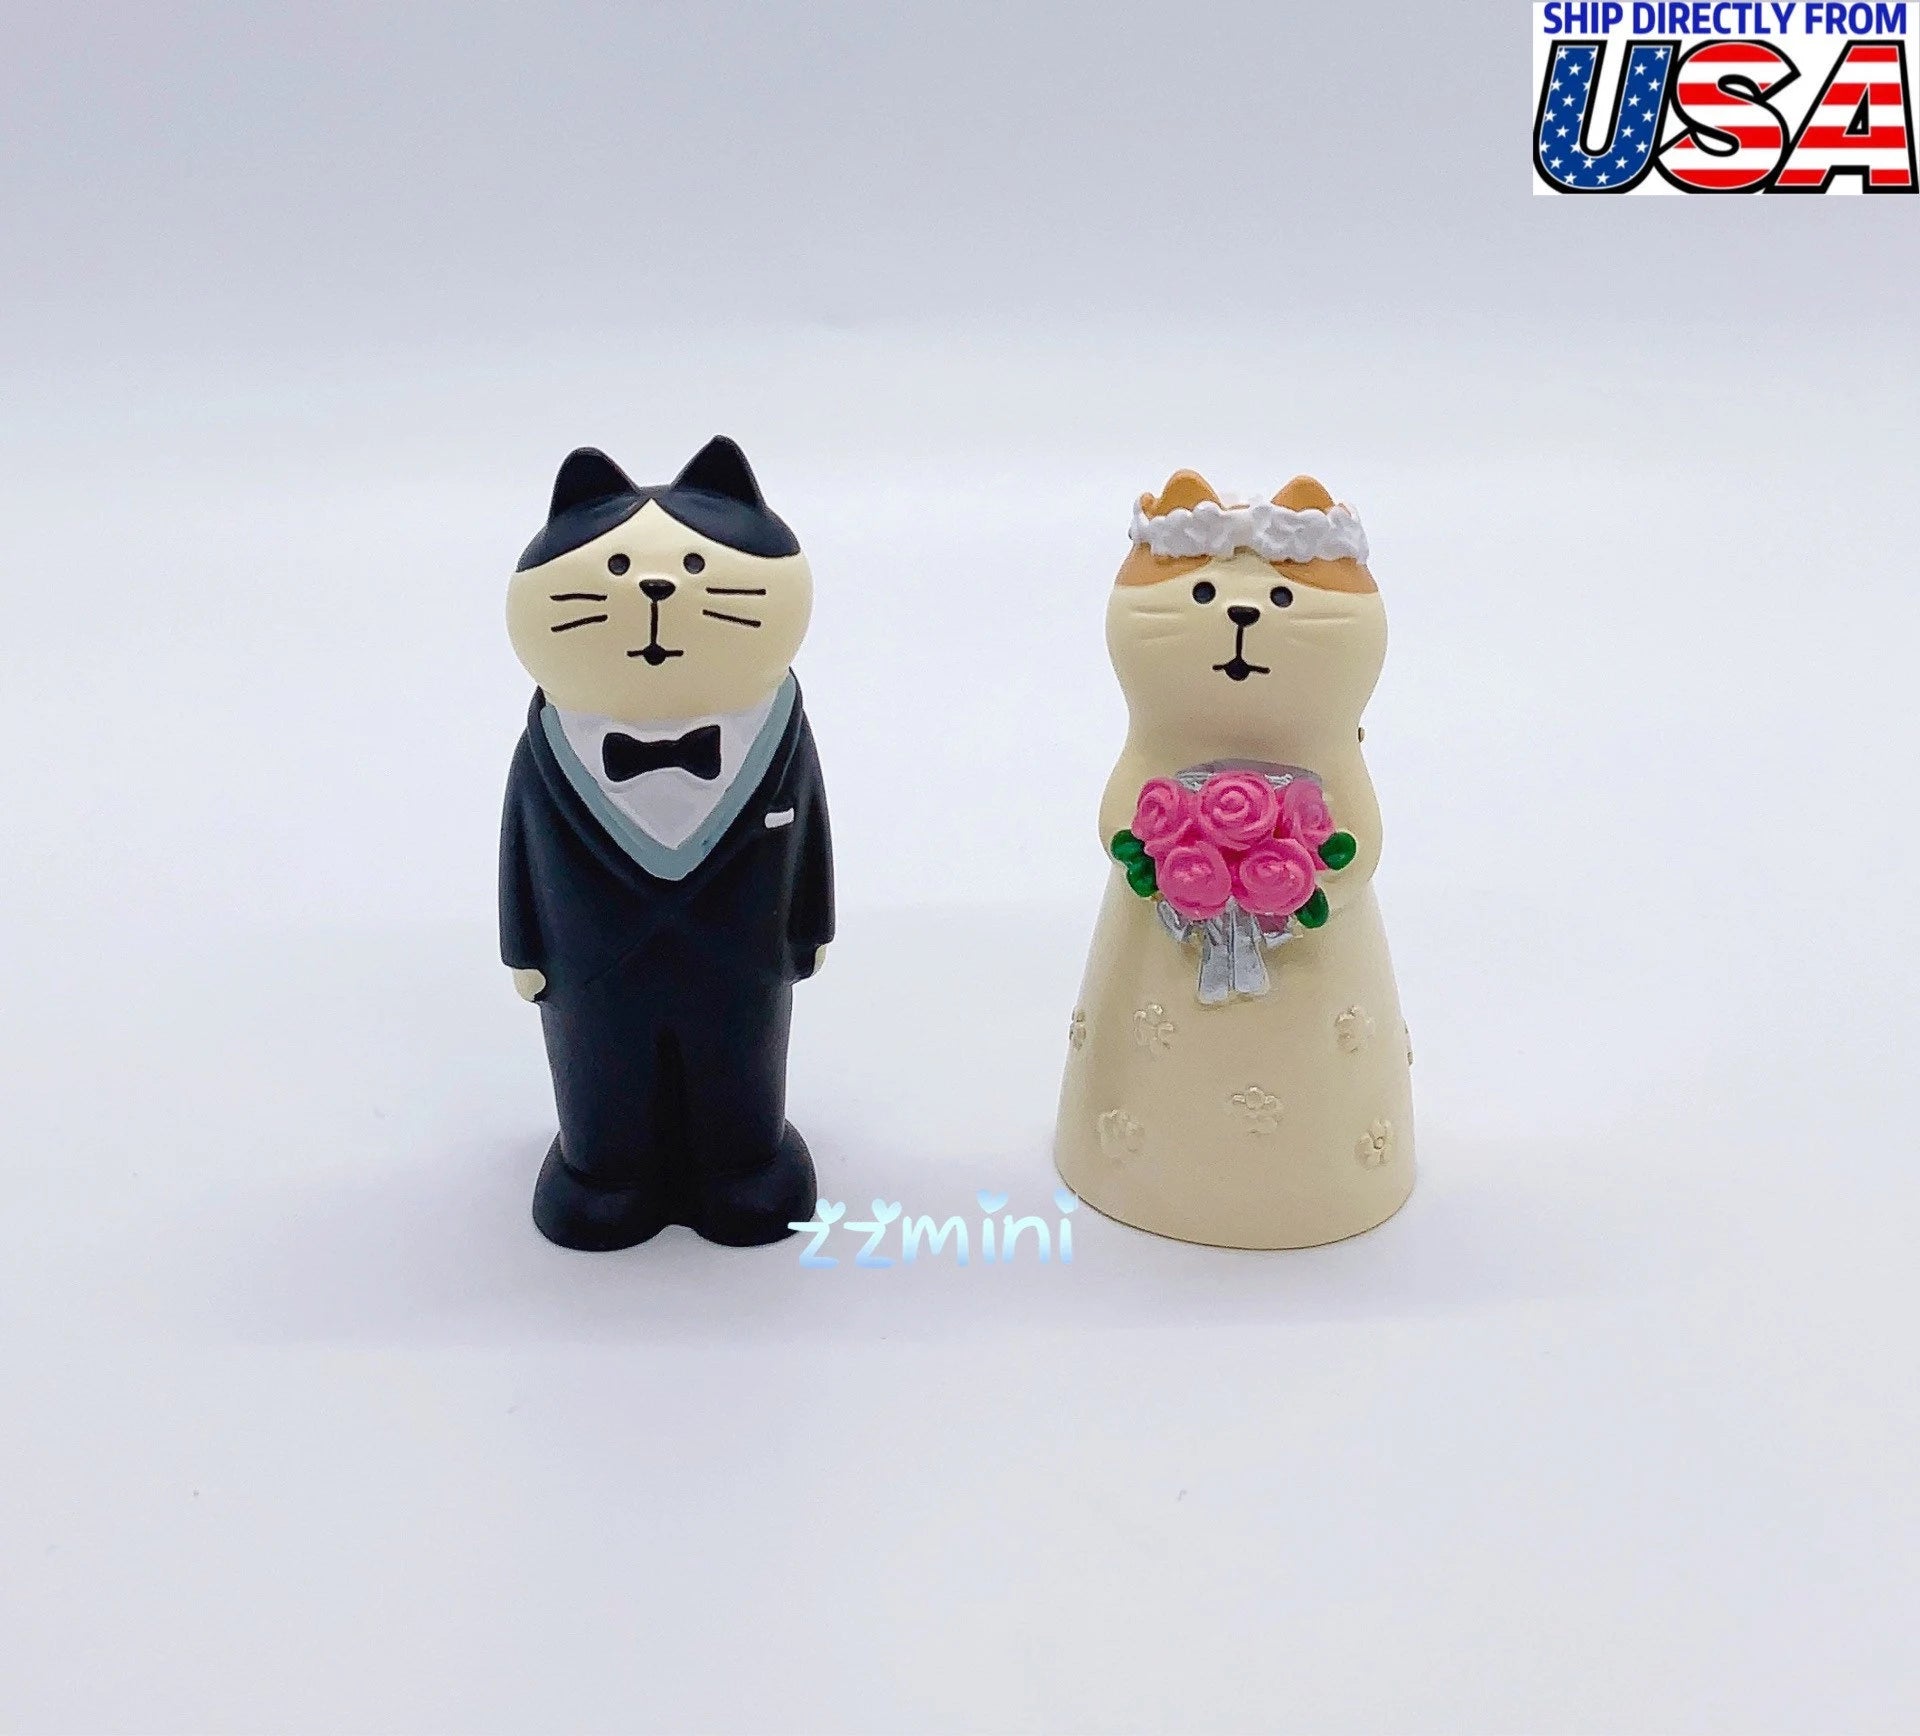 2PCS Cat Wedding Figures 1 Groom+1 Bride Action Cake Topping Kids Adult Funny Doll Toy Ornament Gift Figure Desktop Decoration Fairy Garden